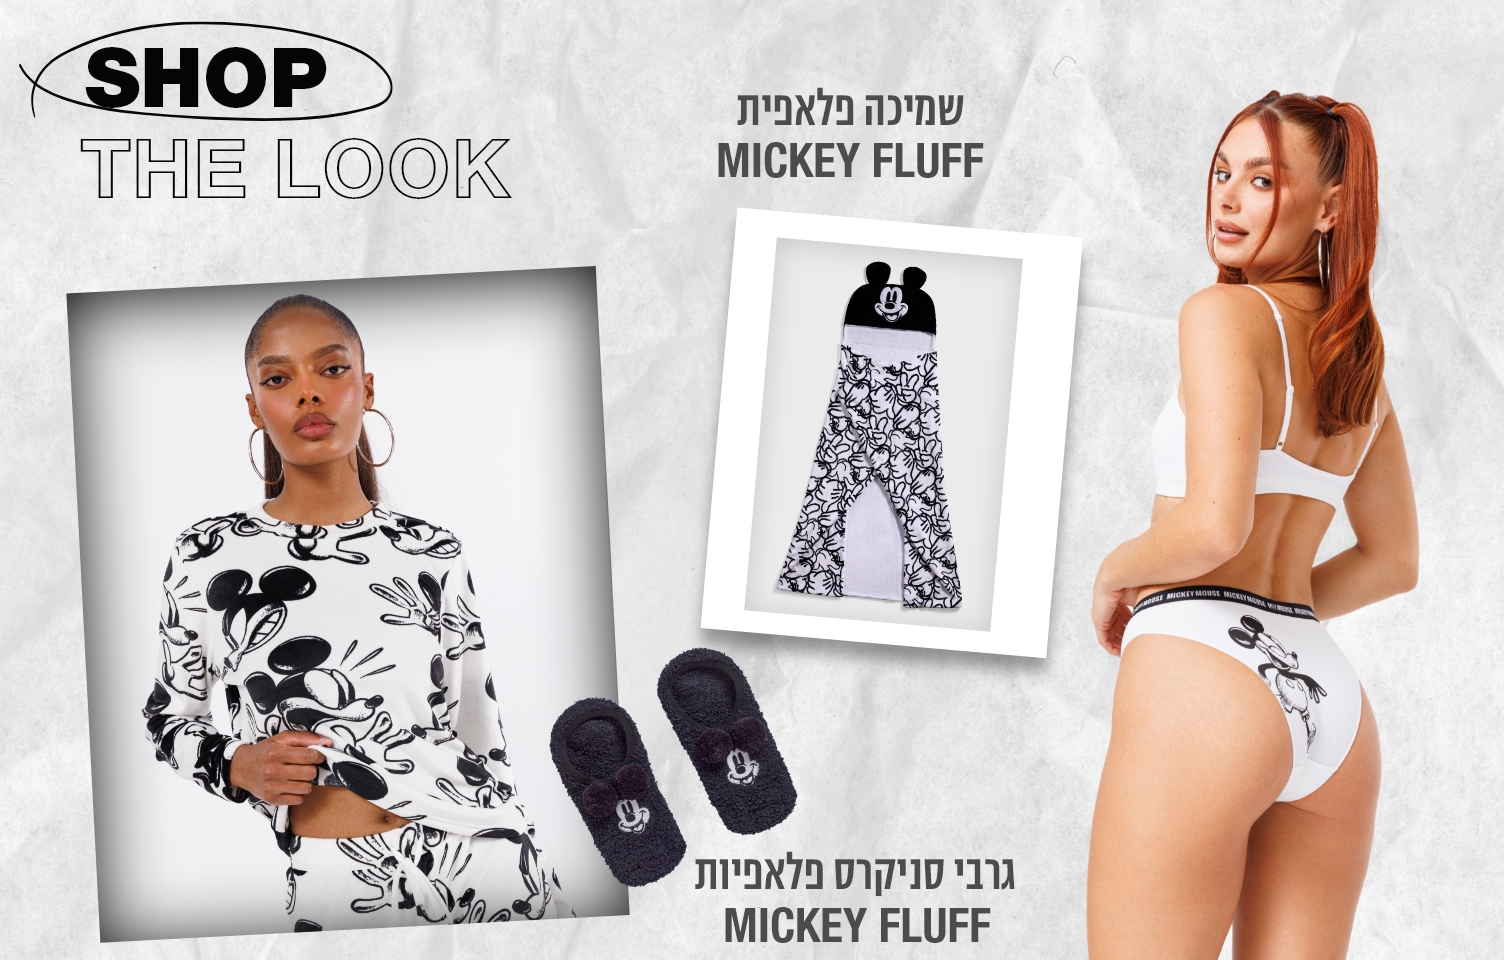 SHOP THE LOOK MICKEY FLUFF COLLECTION